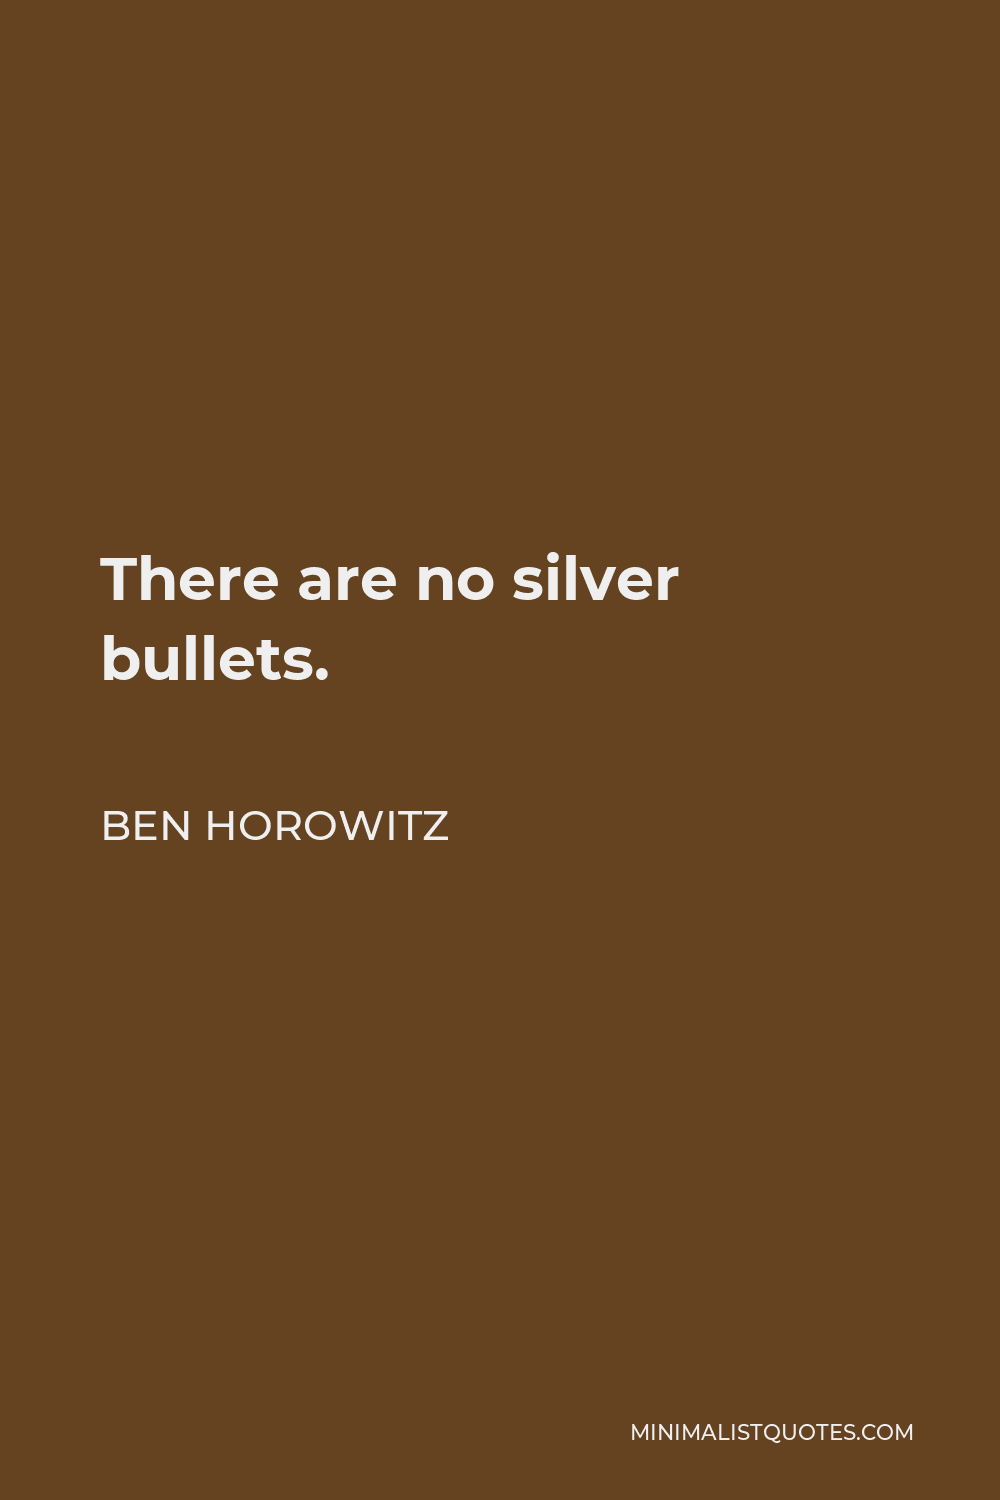 Ben Horowitz Quote - There are no silver bullets.